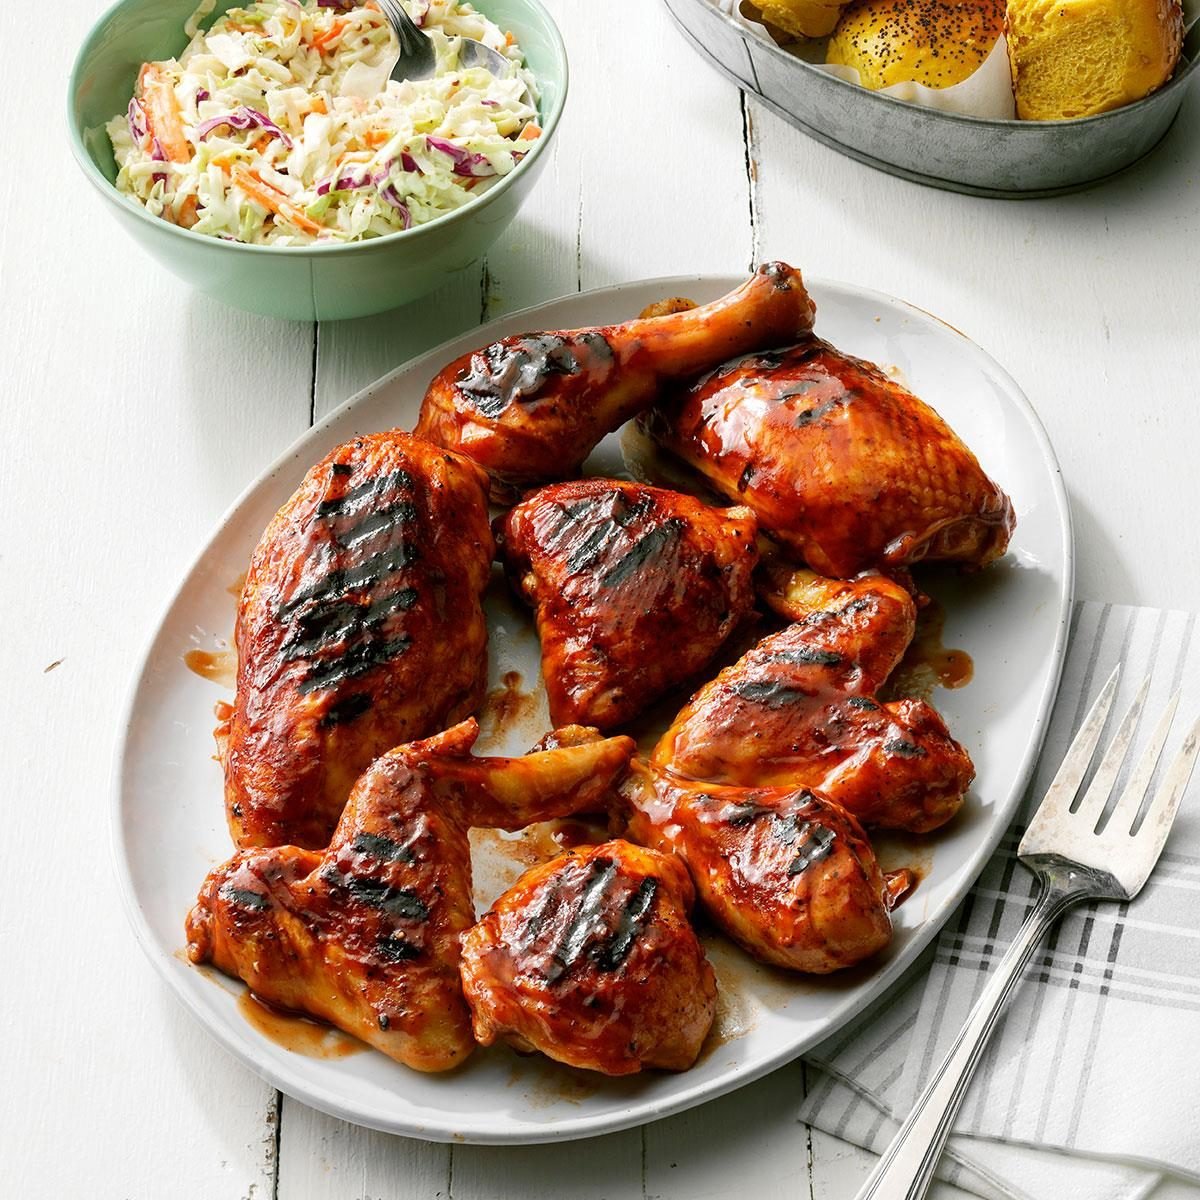 Easy Bbq Recipes For The Simplest Cookout Food Ever